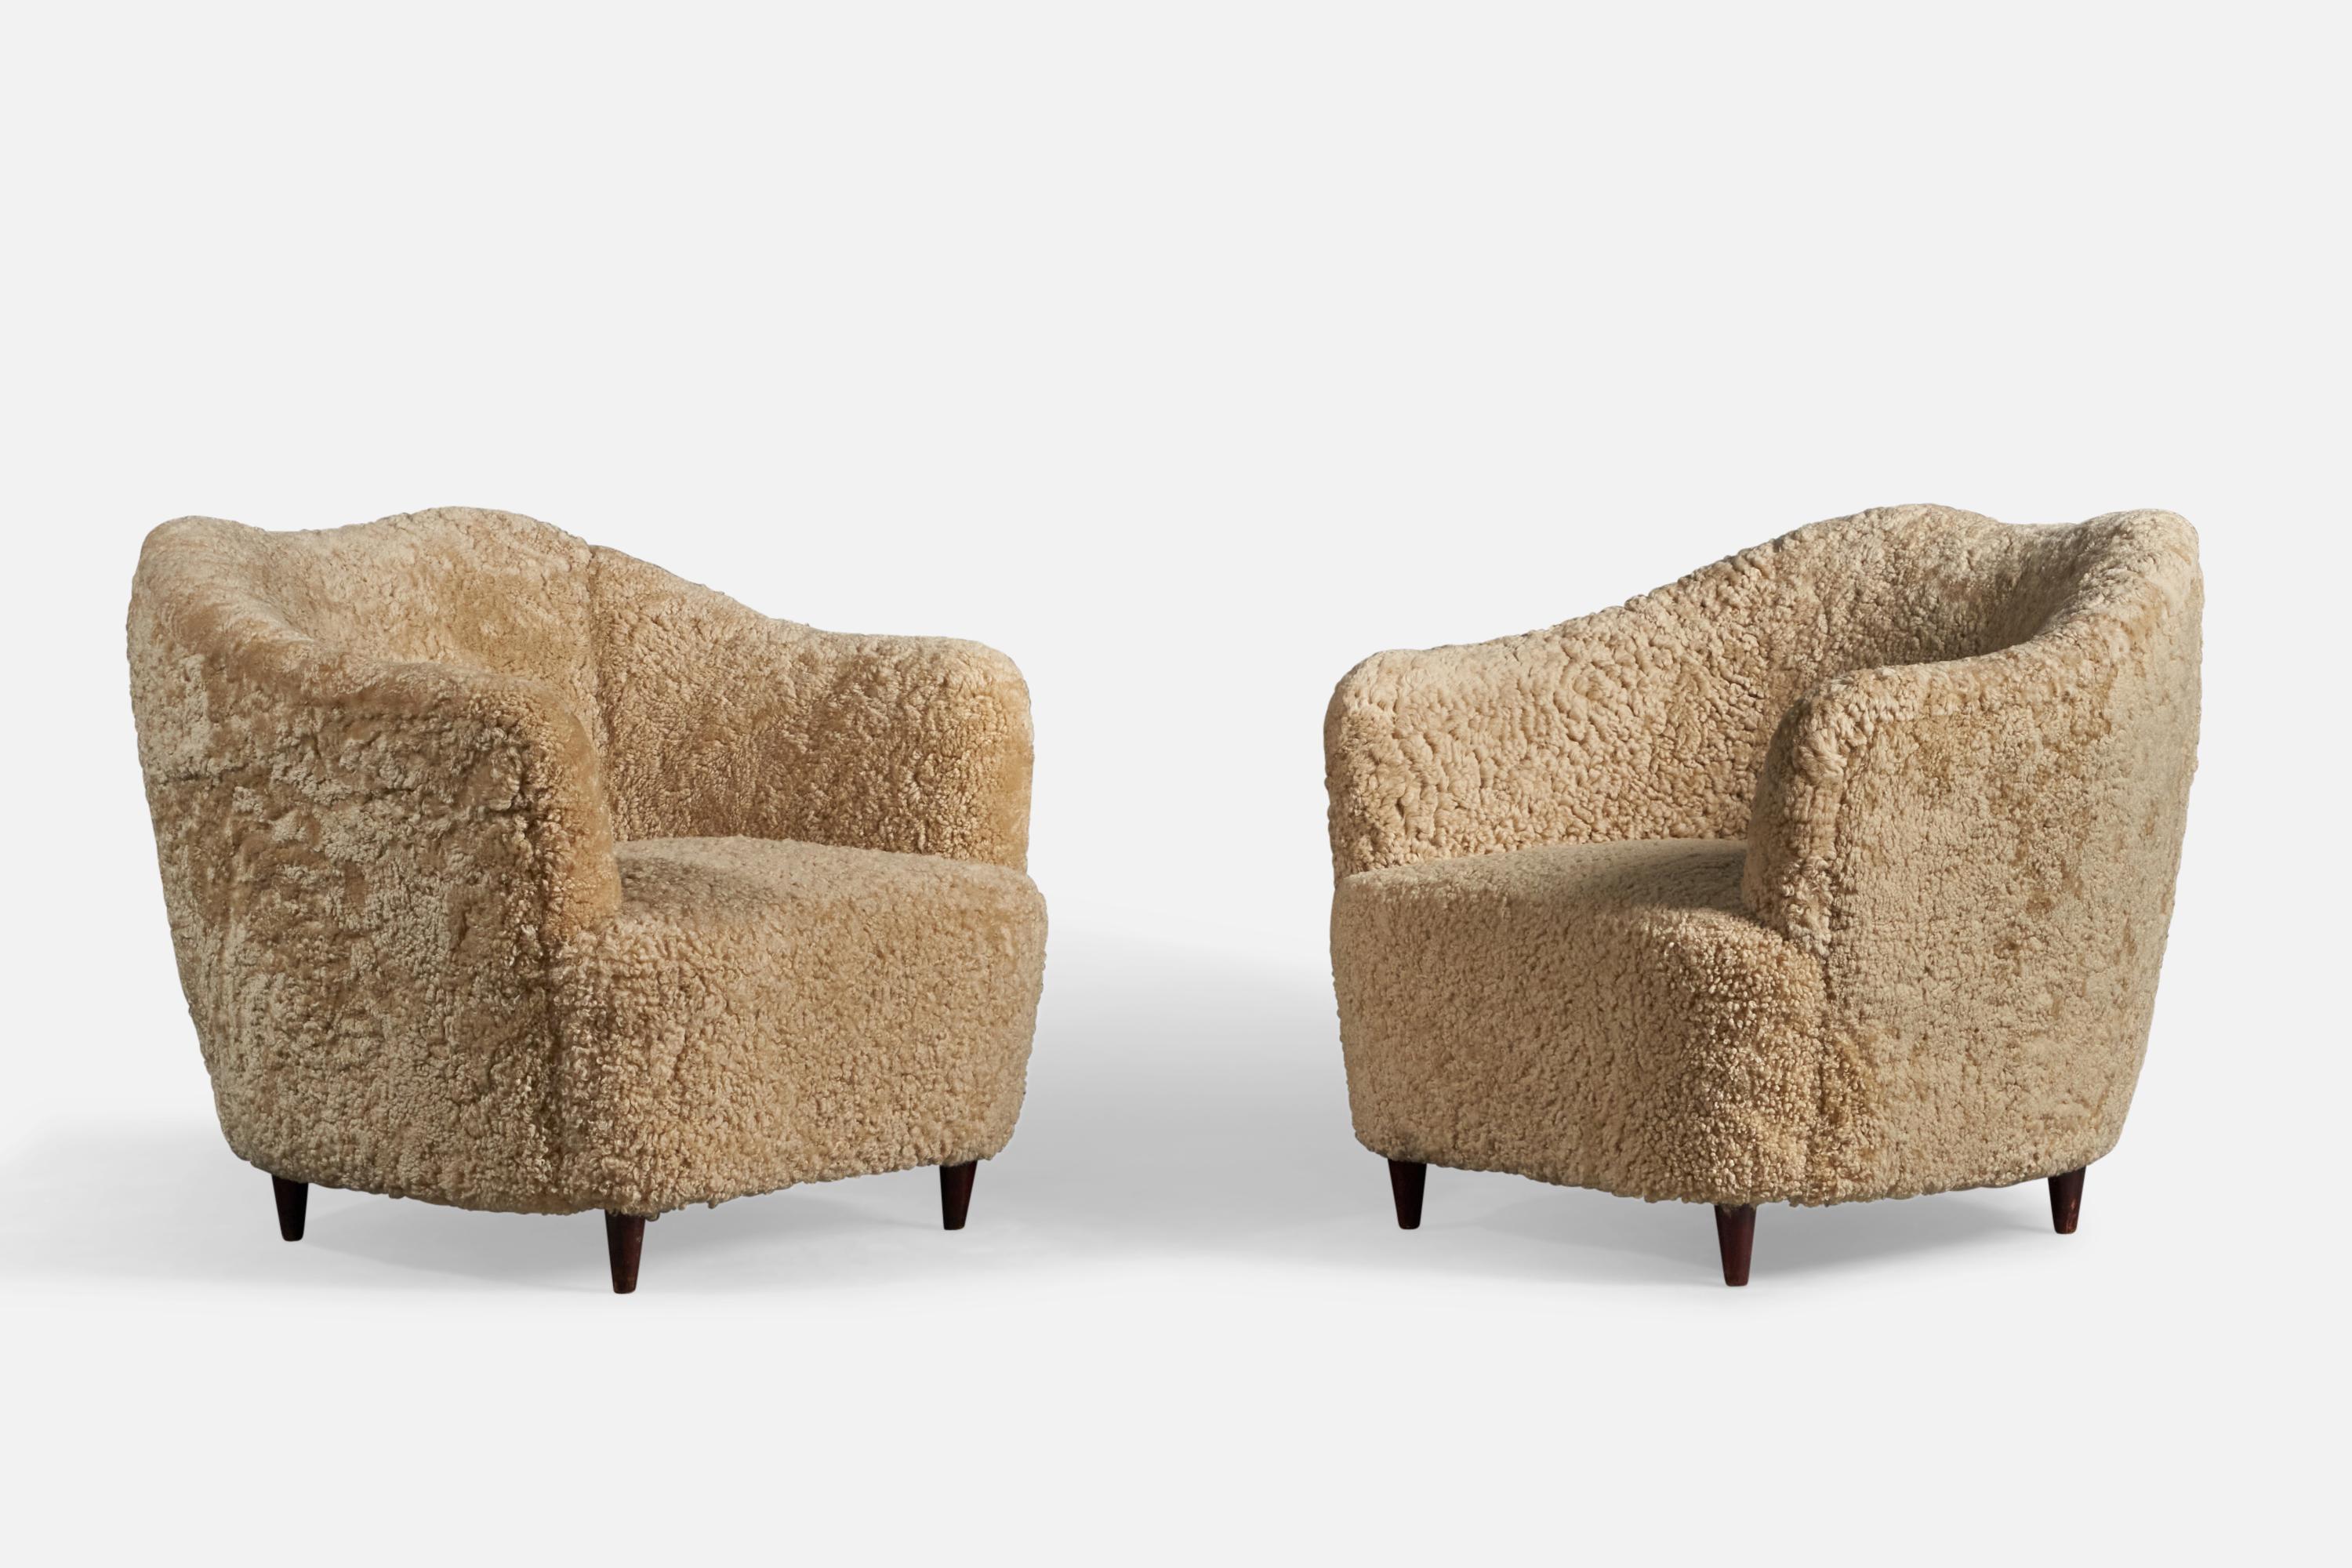 A pair of beige shearling and dark-stained wood lounge chairs, design attributed to Gio Ponti, presumably manufactured by Casa e Giardino.

14.5 seat height